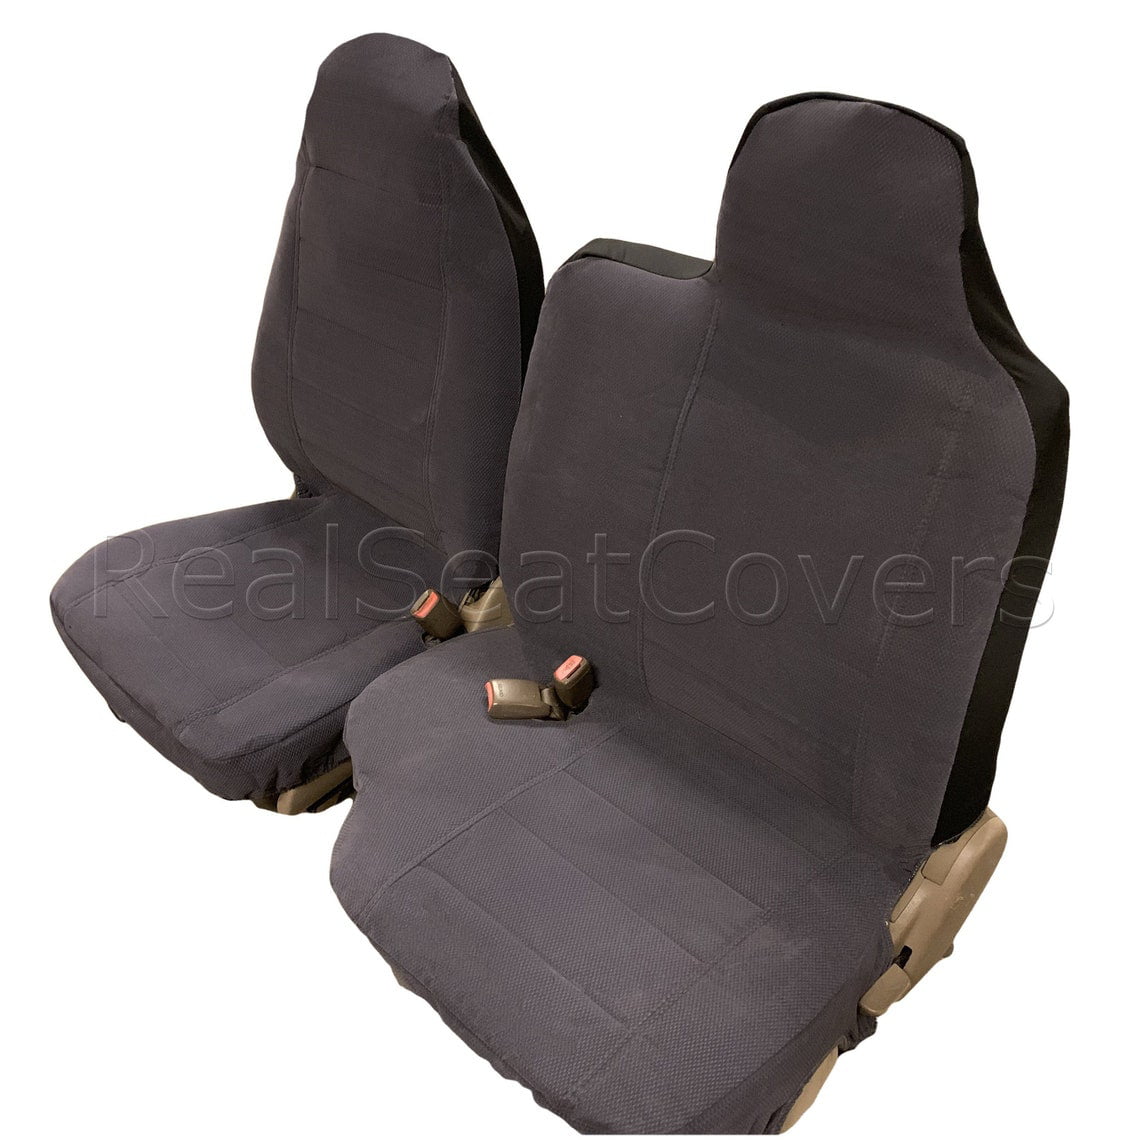 Heavy Duty Black Waterproof Car Seat Covers For Ford Ranger 2 x Fronts 1+1 